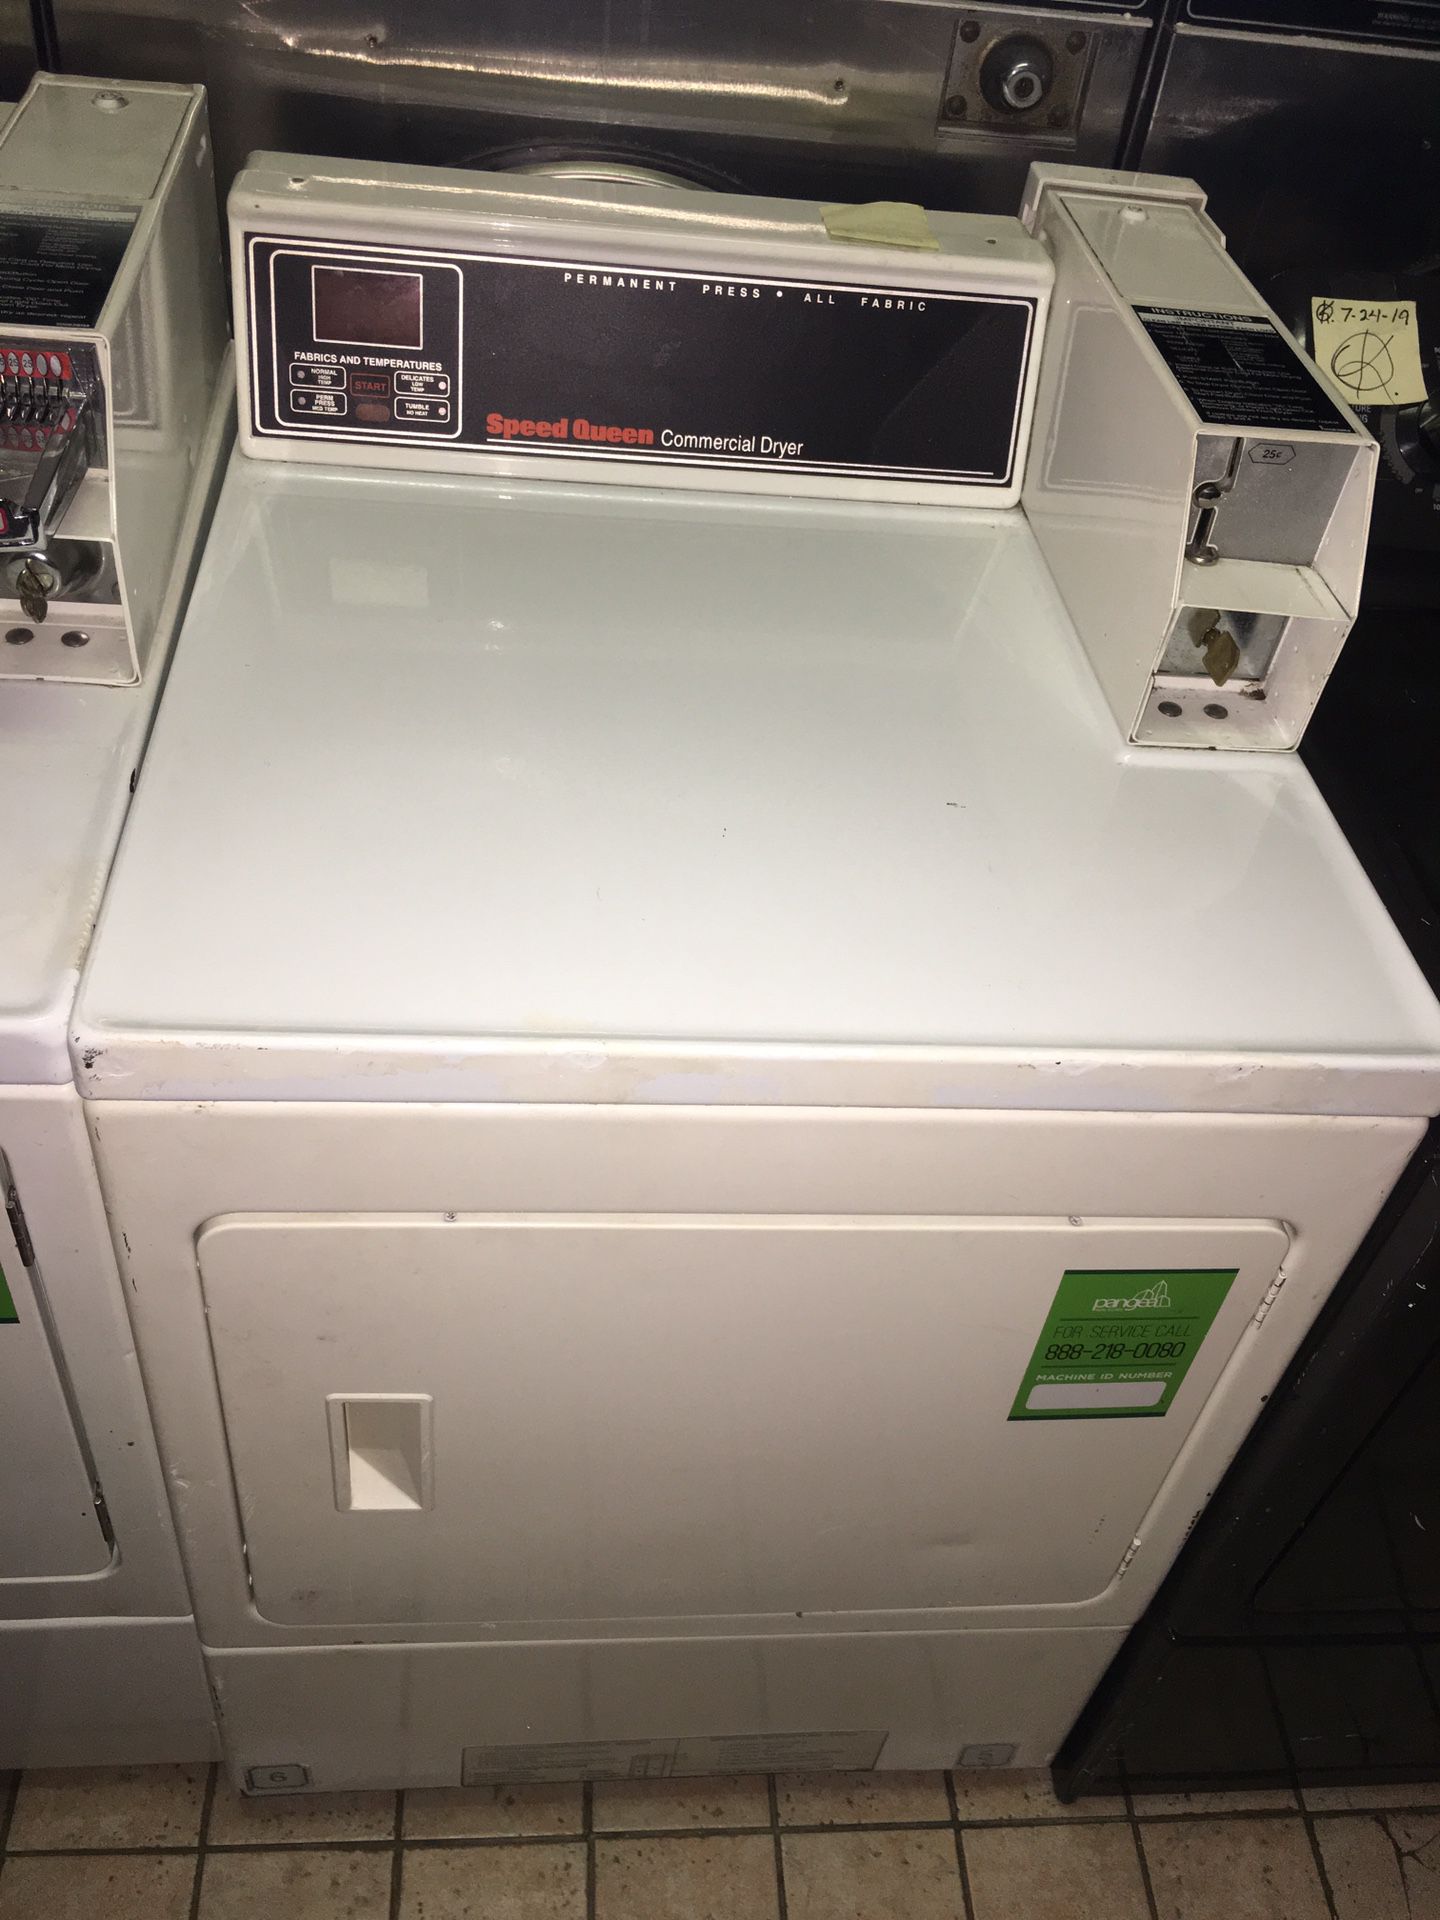 Commercial washers and dryers